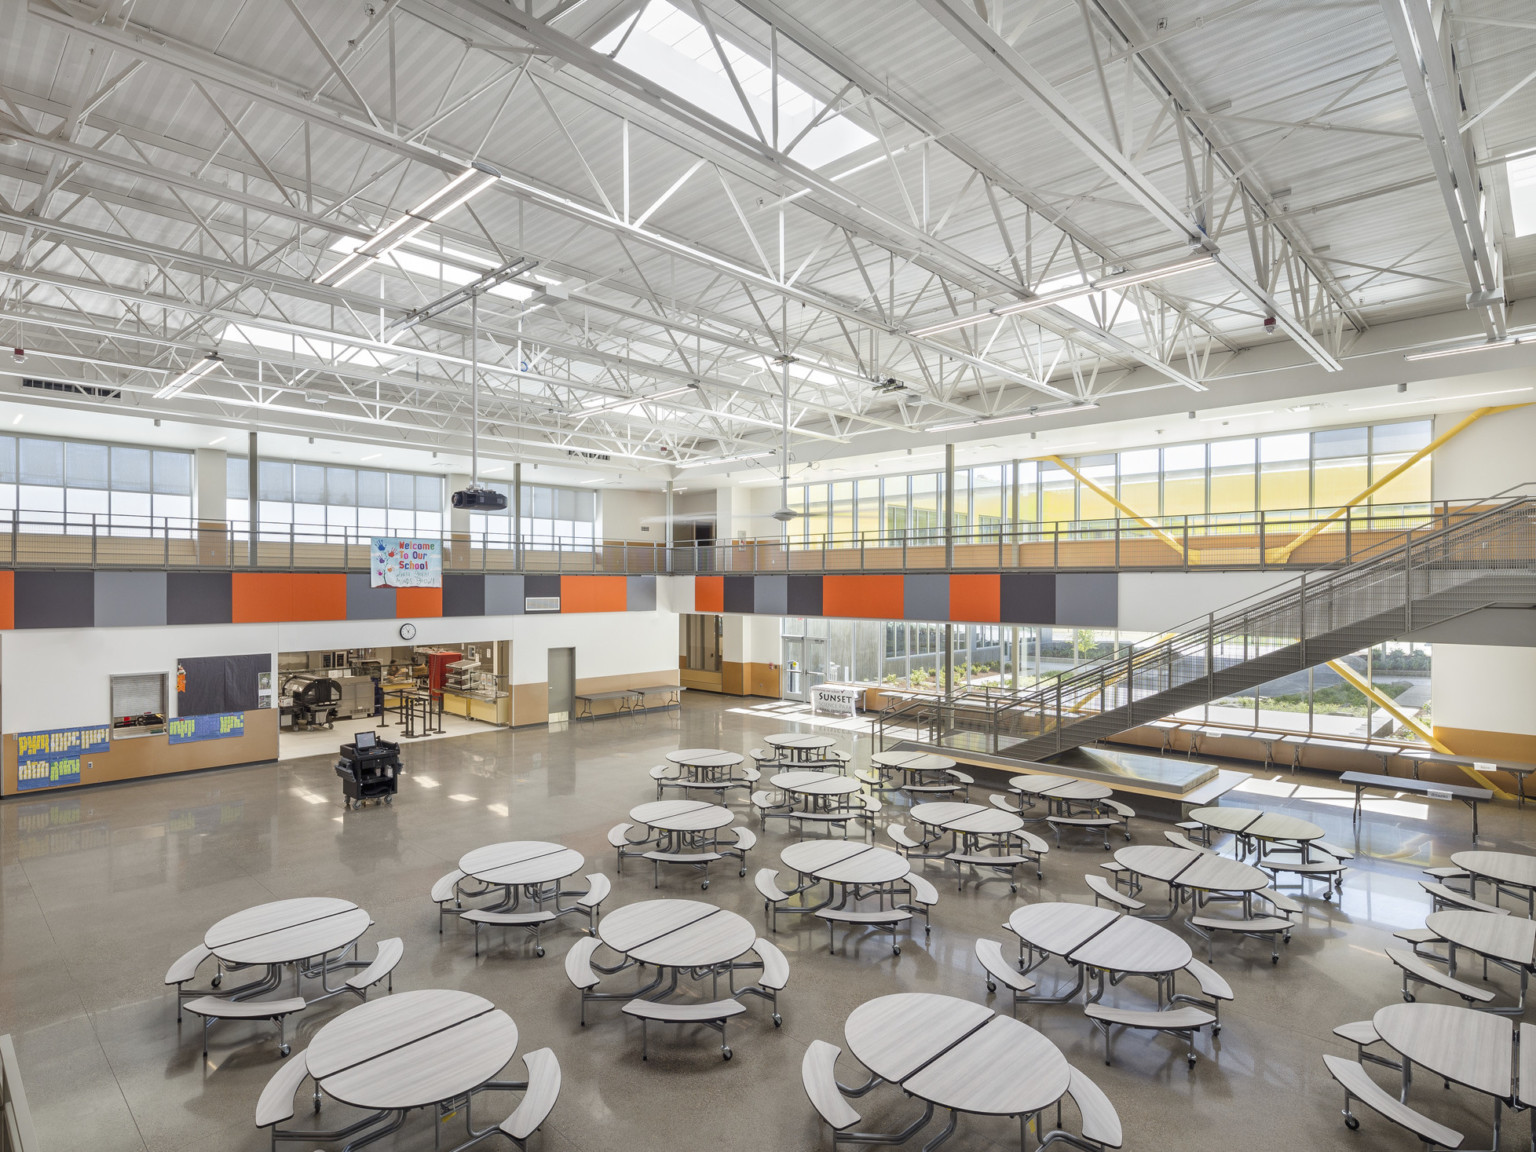 Double height white cafeteria with orange accents. Windows along far wall. Round folding tables on ground level. Kitchen left